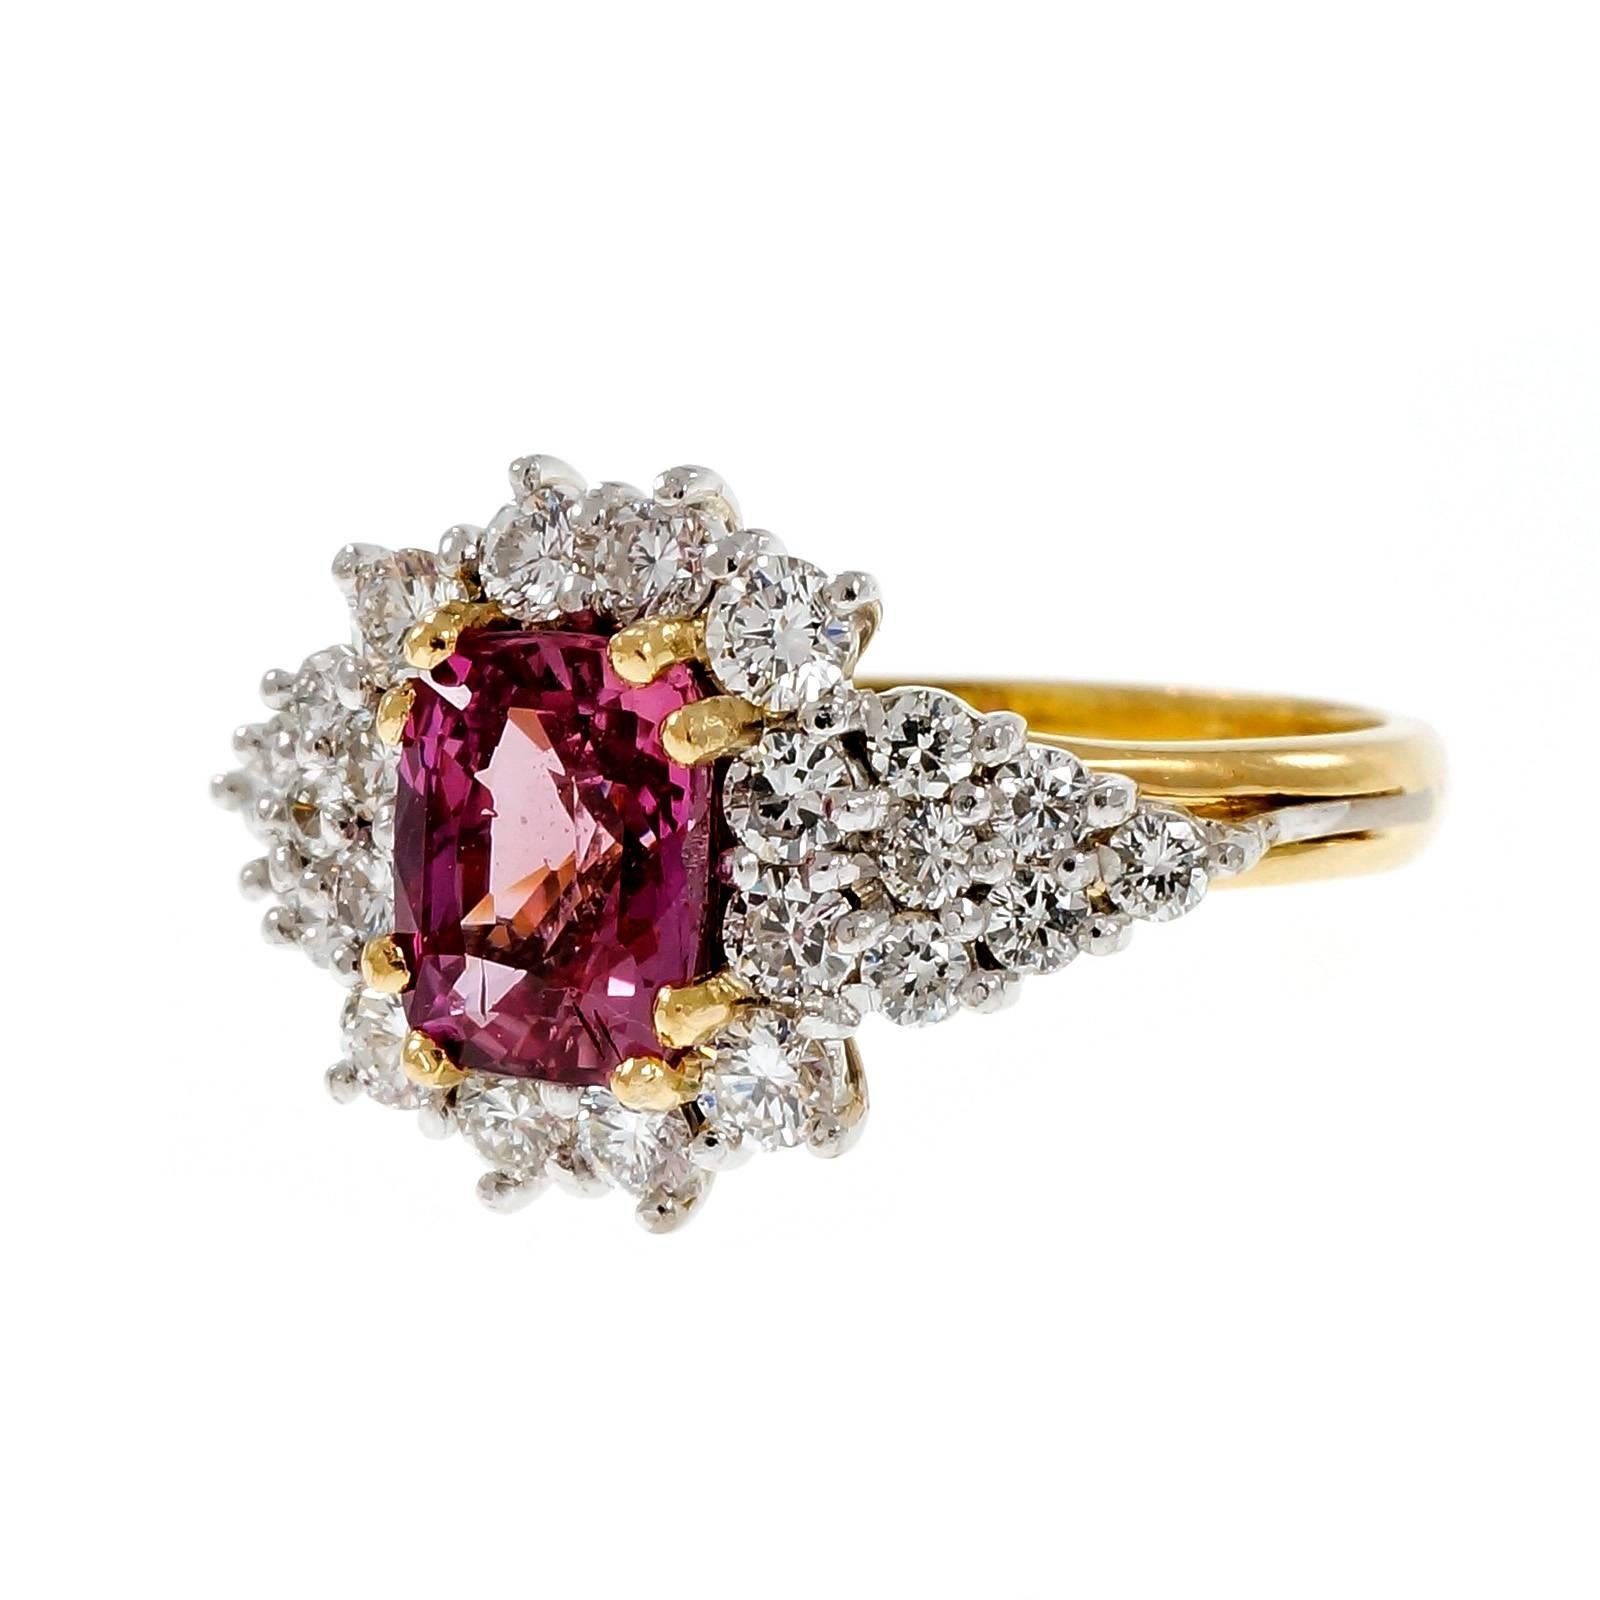 Natural hot pink sapphire diamond gold platinum cocktail engagement ring. Setting is 18k yellow gold with a handmade wire top in Platinum. Diamonds are bright white. Cushion sapphire is bright gem hot pink.

1 cushion gem pink sapphire, approx.